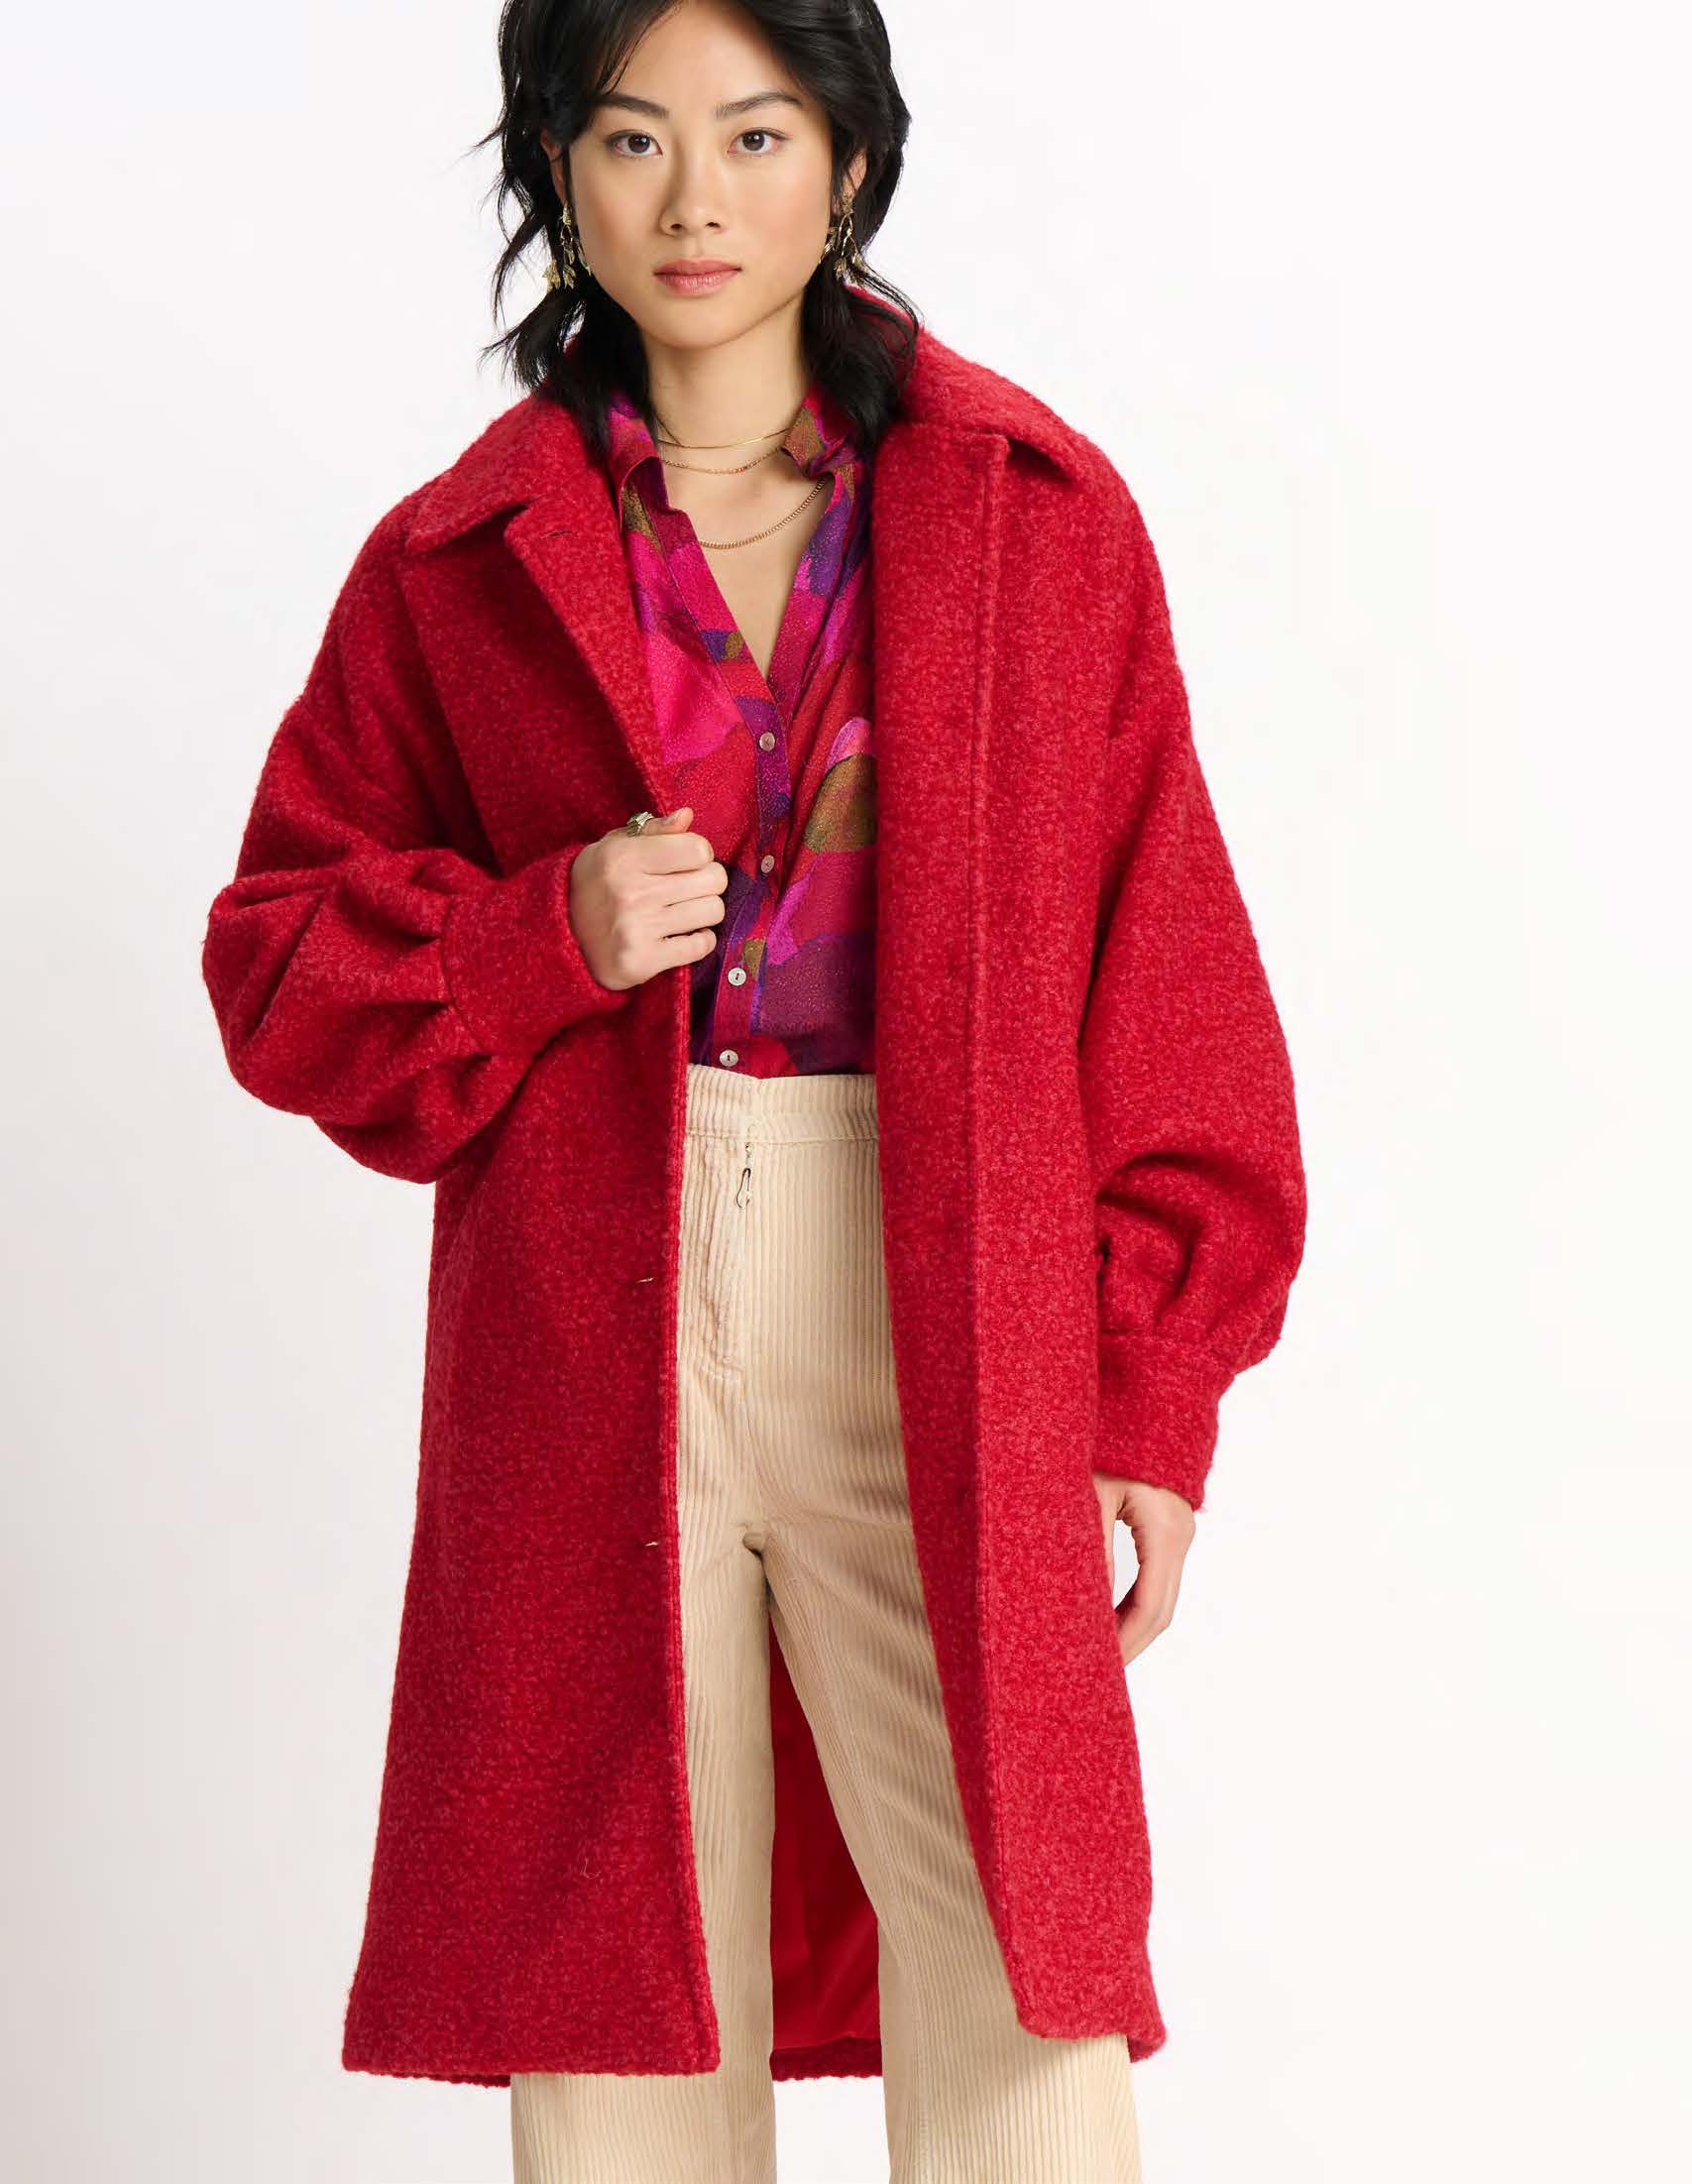 No:SP7453 | Name:COAT | Color:Scarlet Red【POM AMSTERDAM_ポムアムステルダム】【入荷予定アイテム・入荷連絡可能】